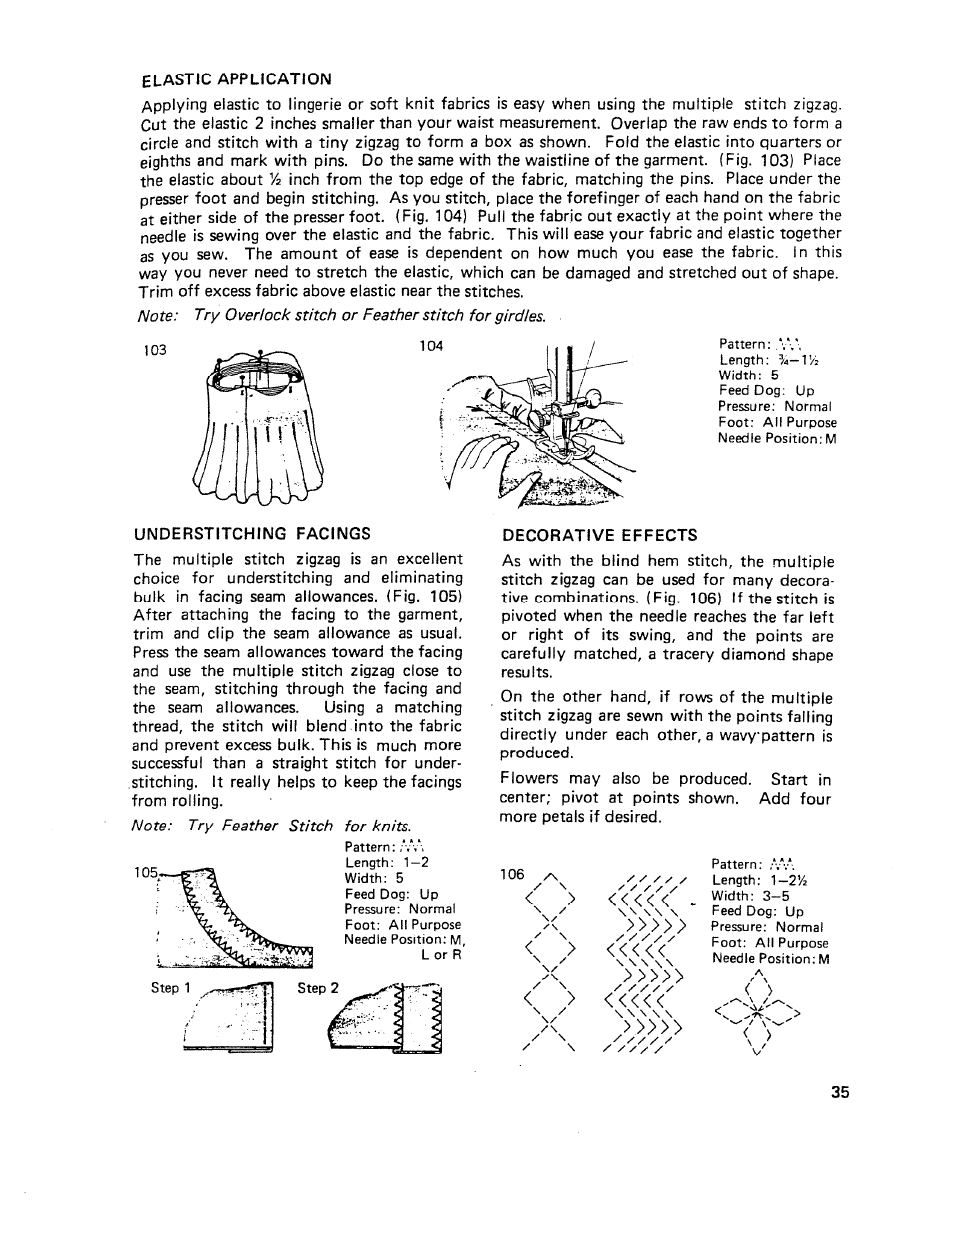 Understitching facings, Decorative effects | SINGER W510 User Manual | Page 37 / 58